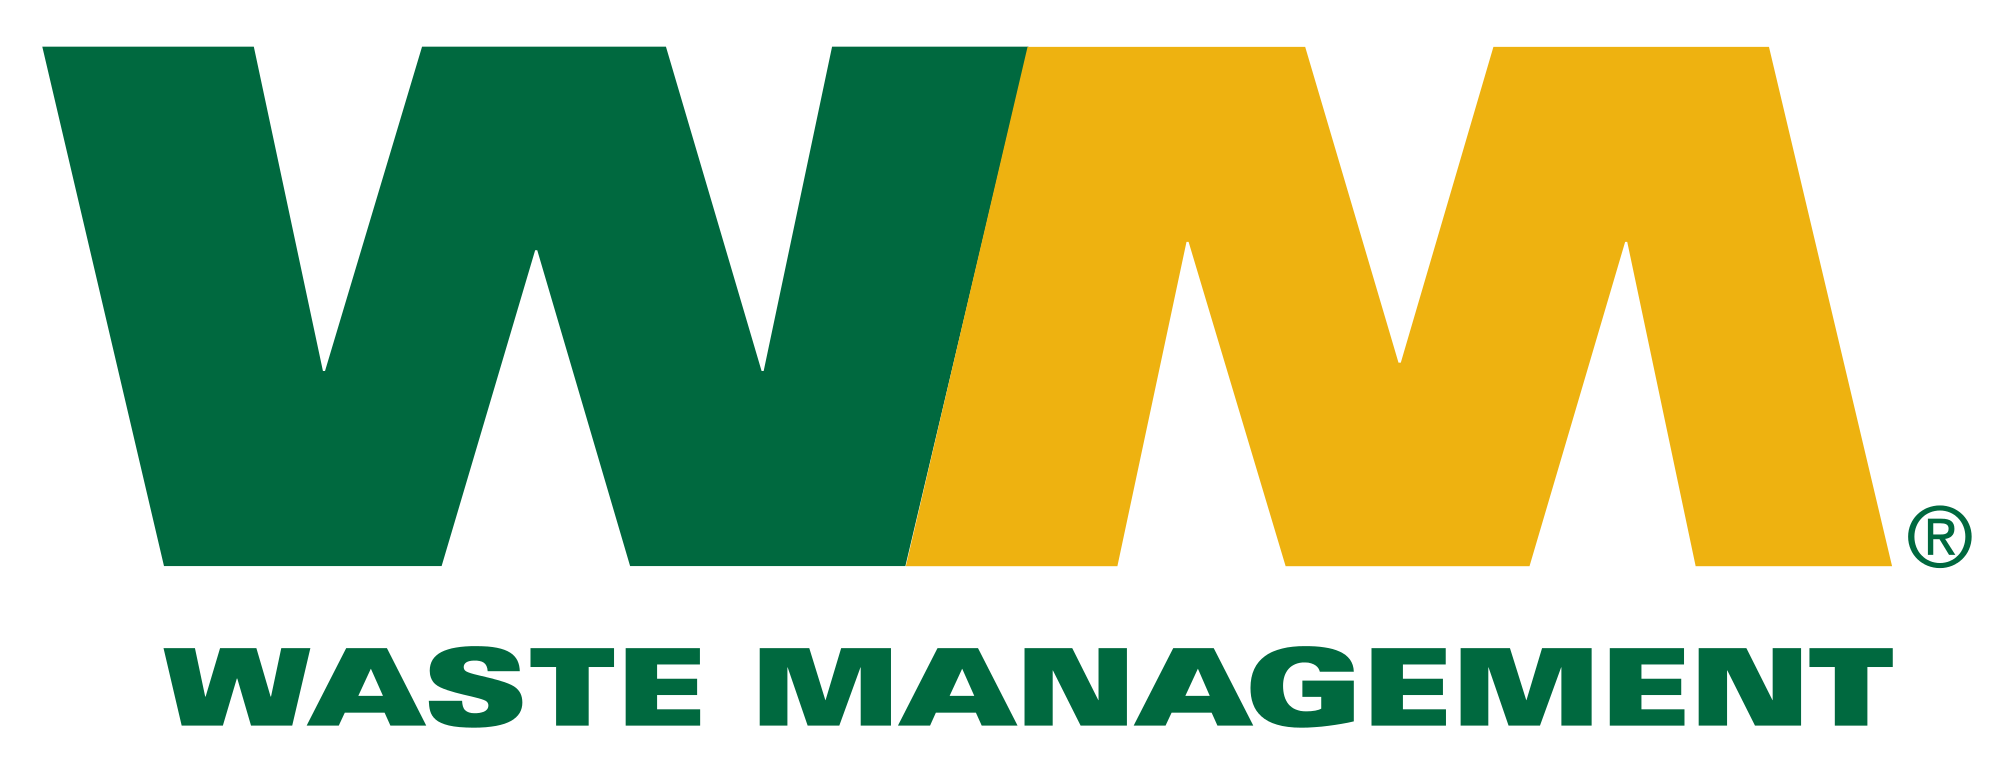 Waste Management of Mn Logo | City of Vergas Business Directory